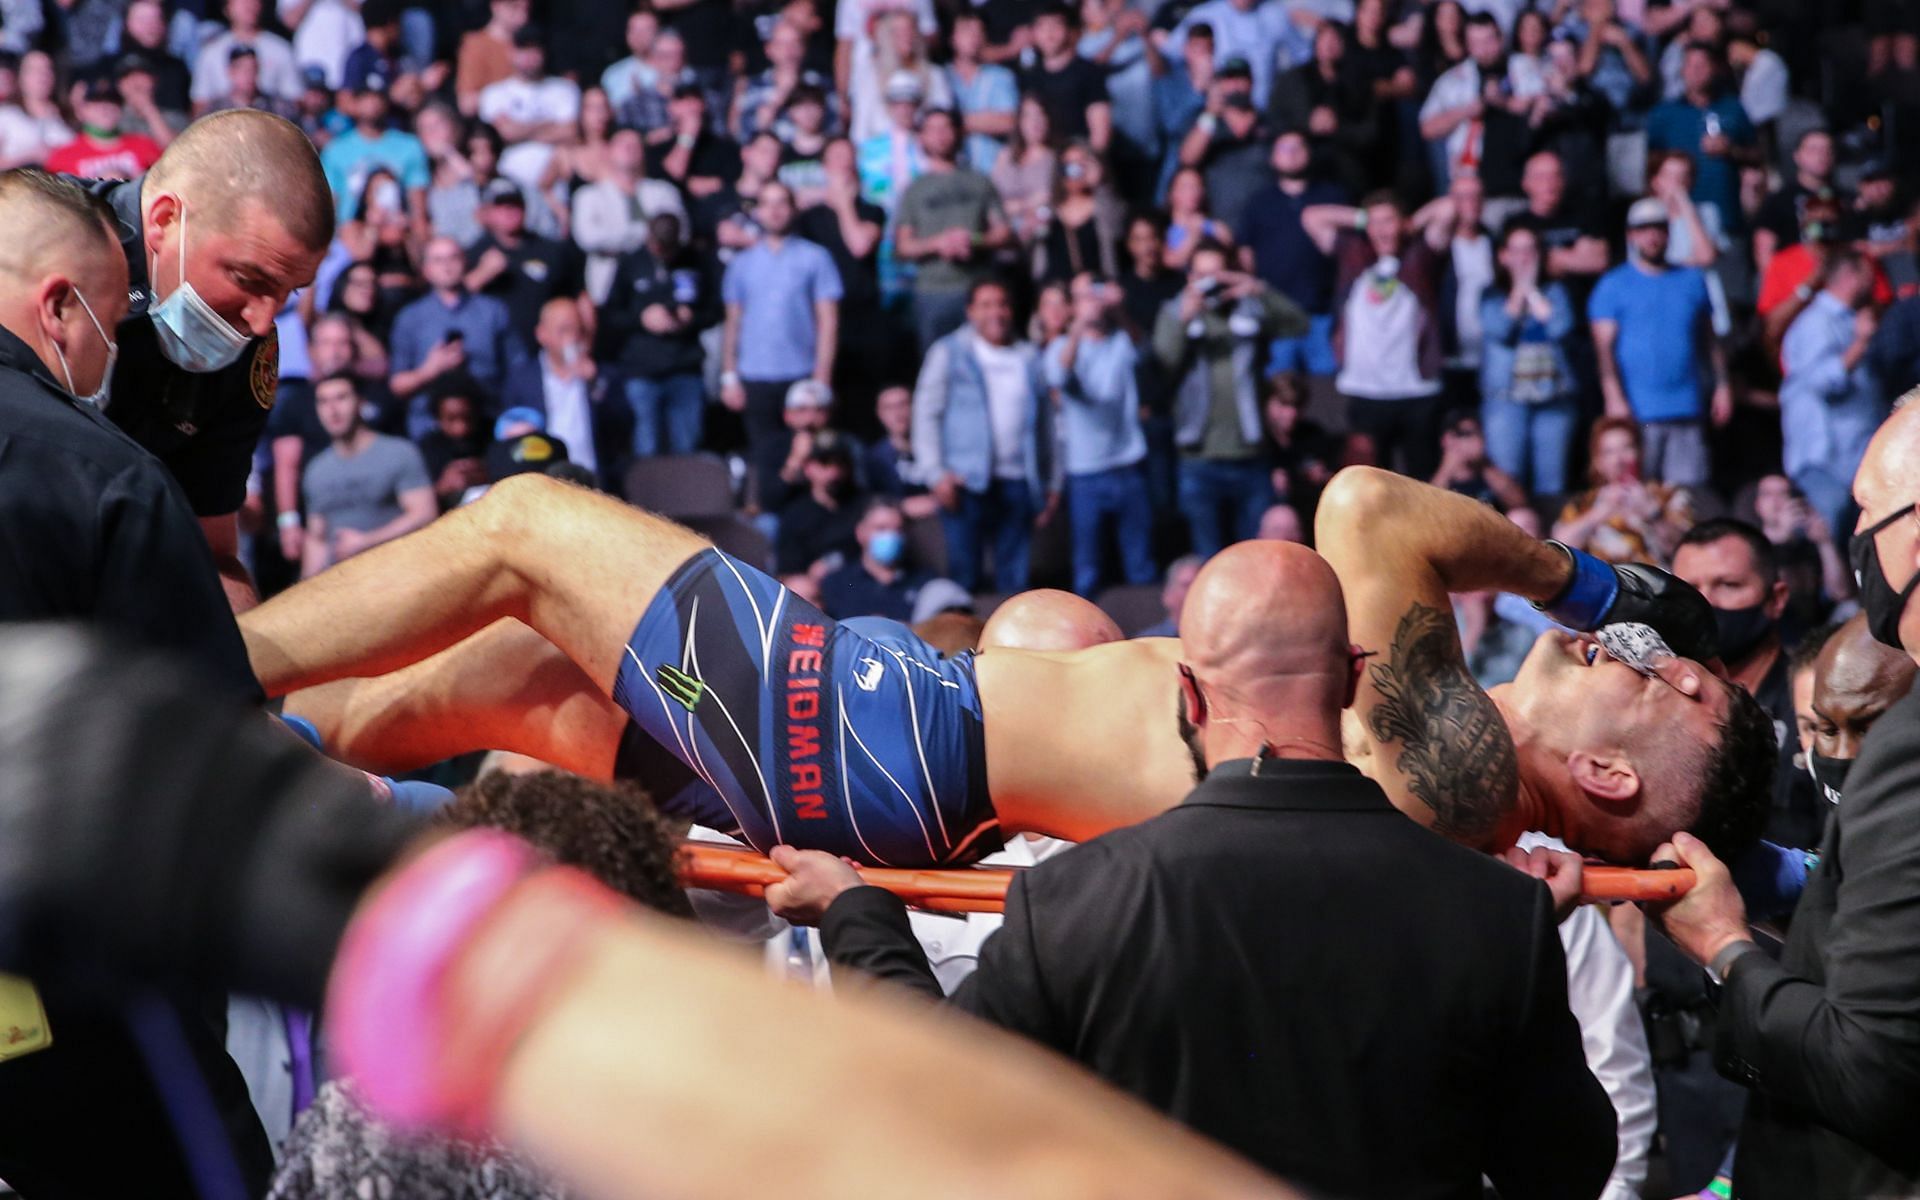 Chris Weidman was stretchered out and swiftly transported to a hospital after his horrific leg injury [Image courtesy: Getty Images]